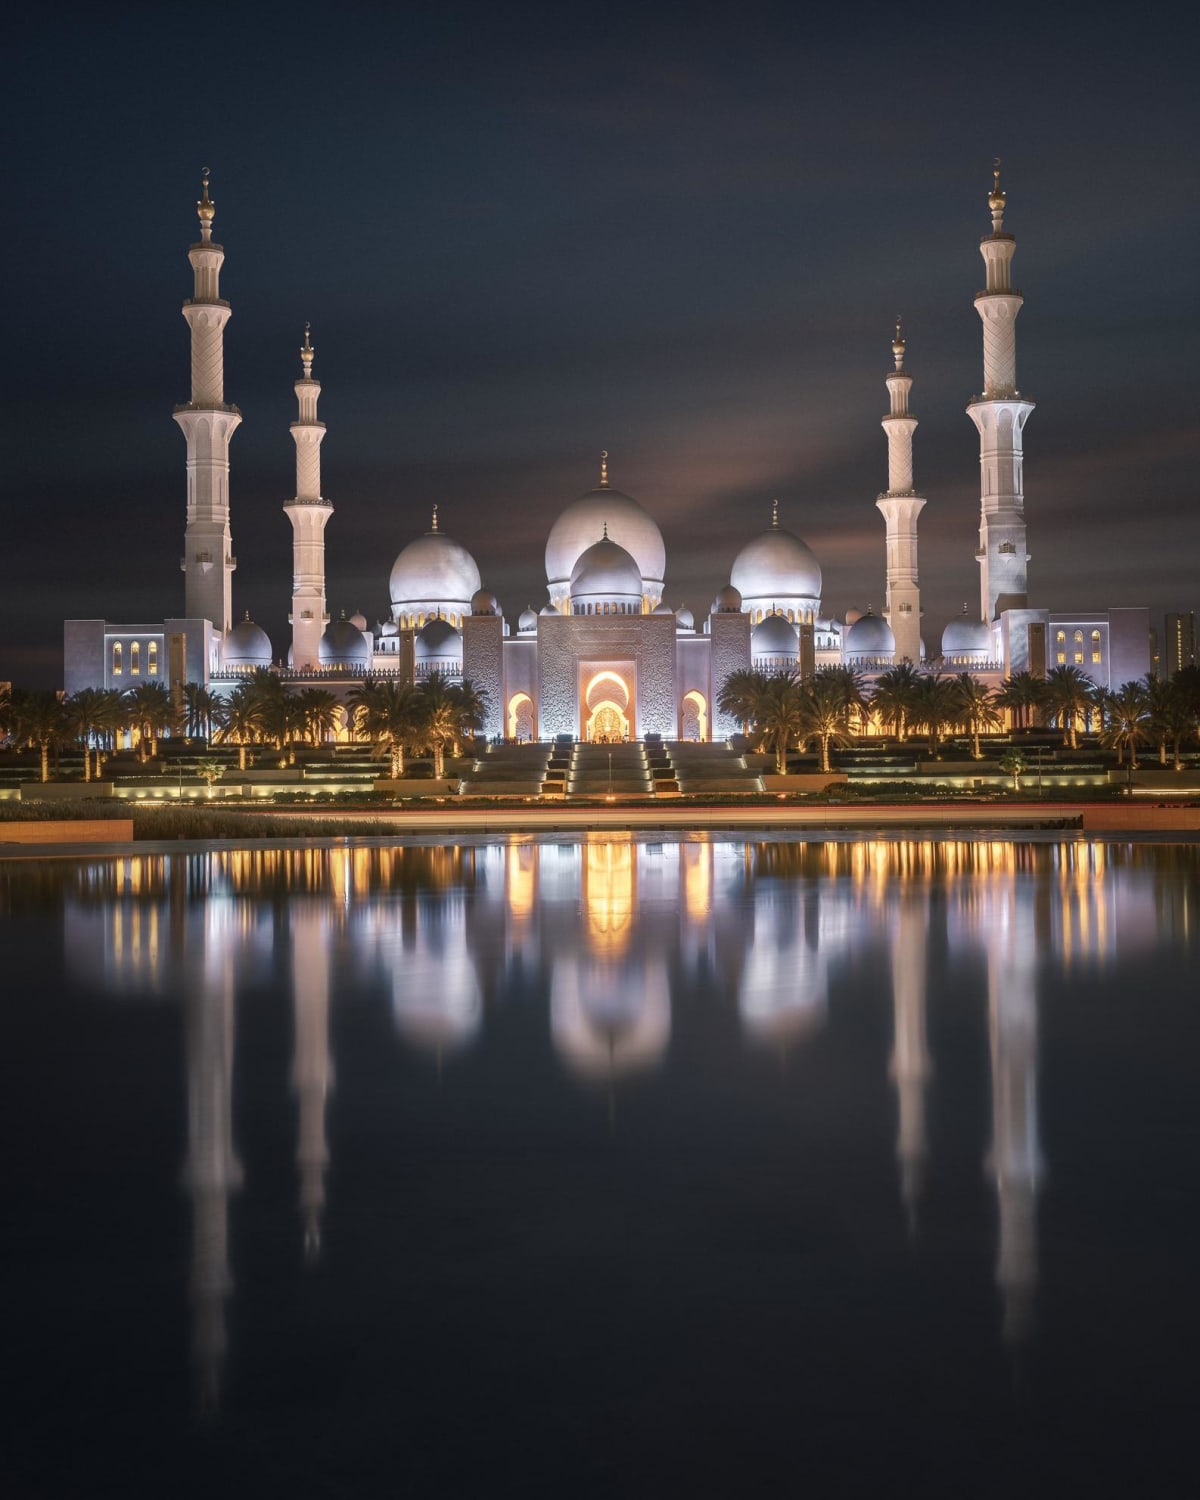 The Grand Mosque in Abu Dhabi [oc]